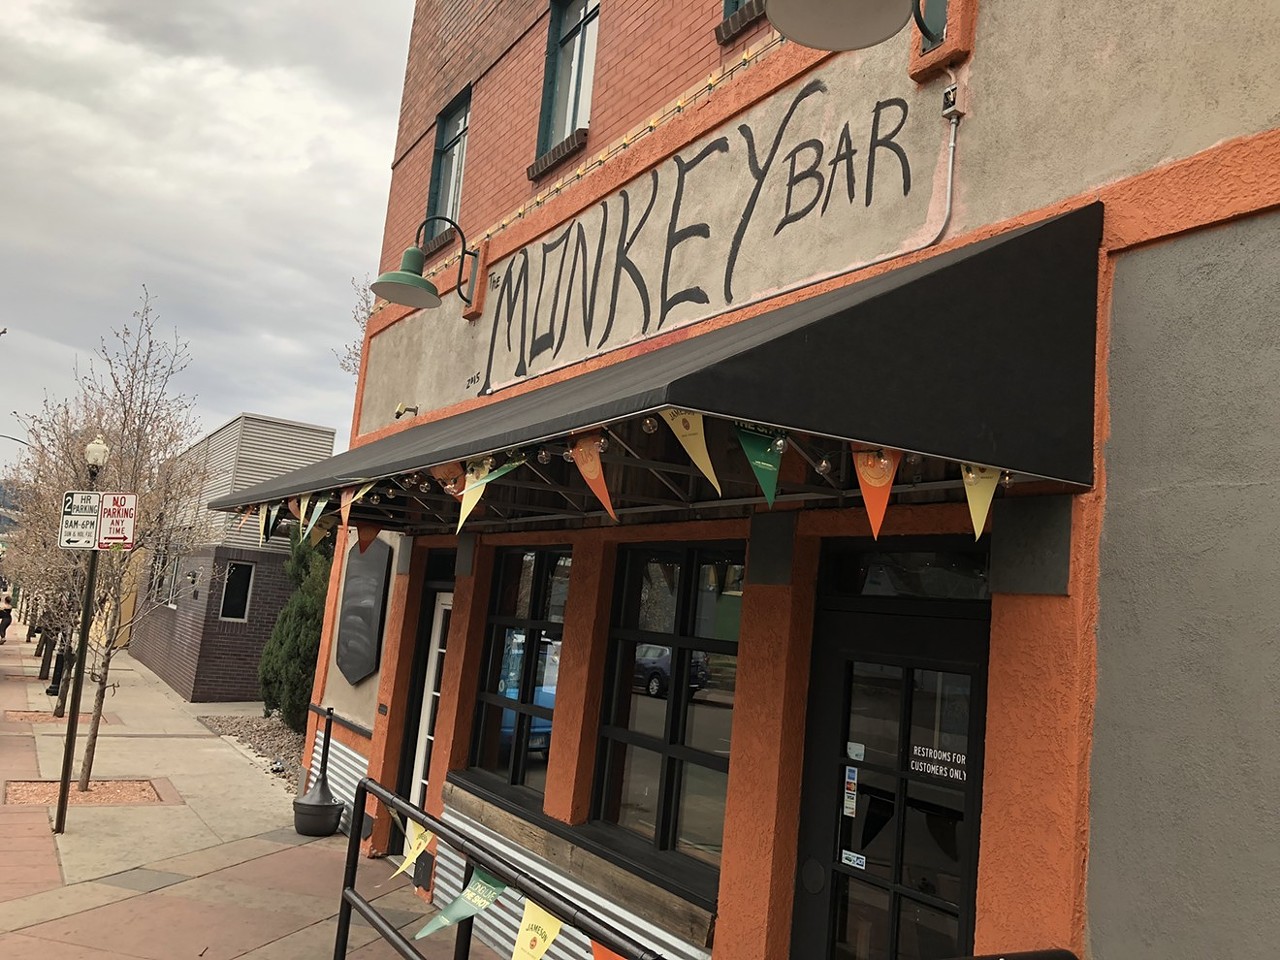 The Monkey Bar And Grille